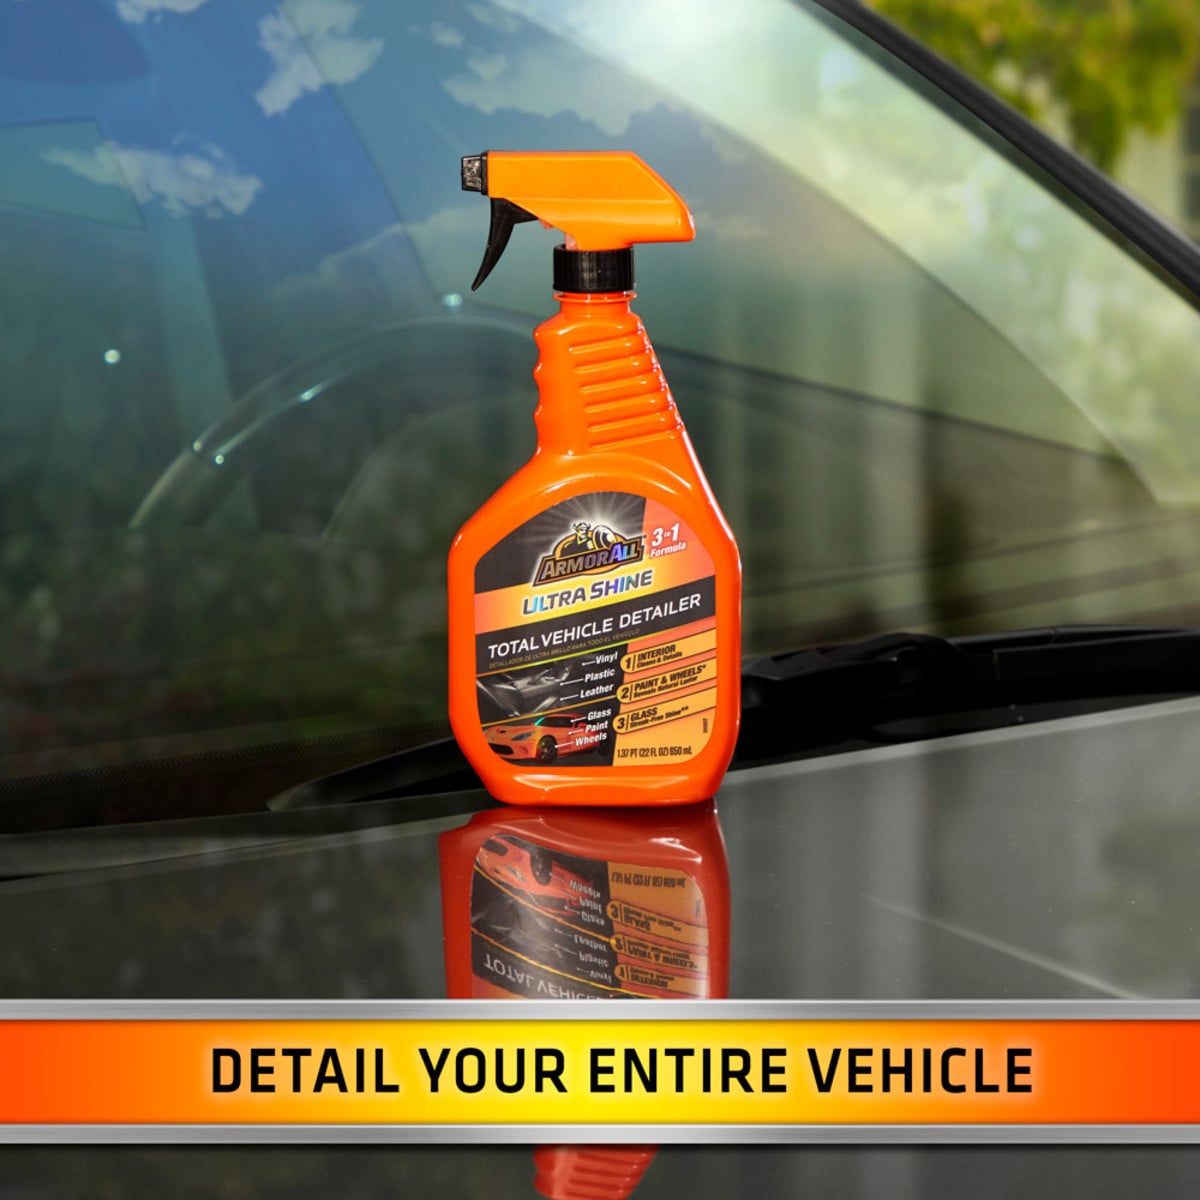 Cleaning and Detailing with Shine Armor Quick Spray Wax 